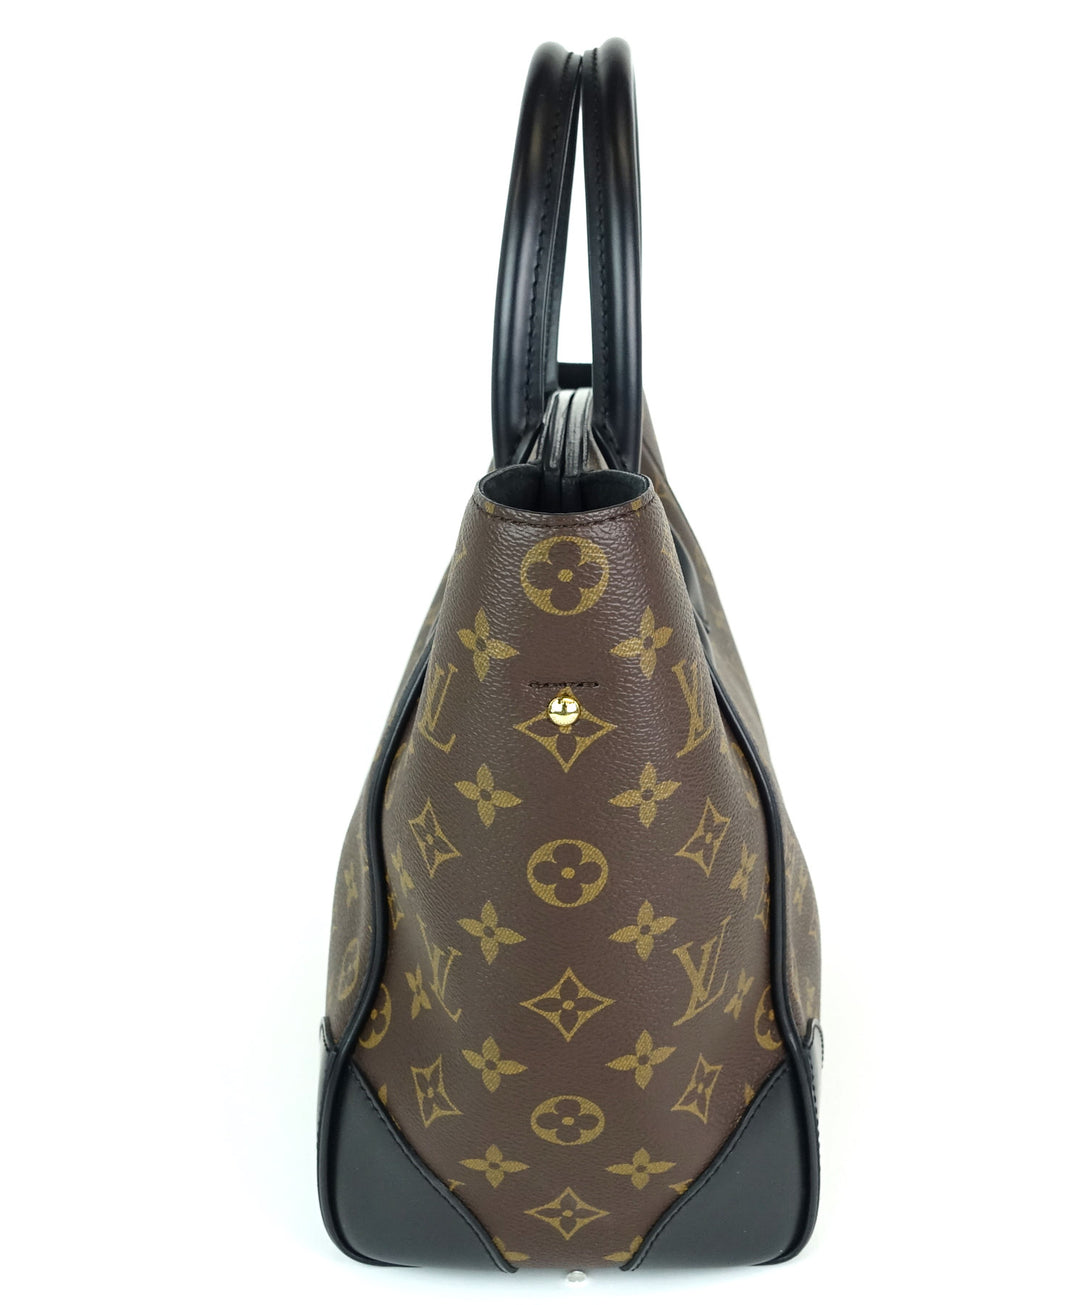 phenix mm monogram canvas and calfskin leather tote bag